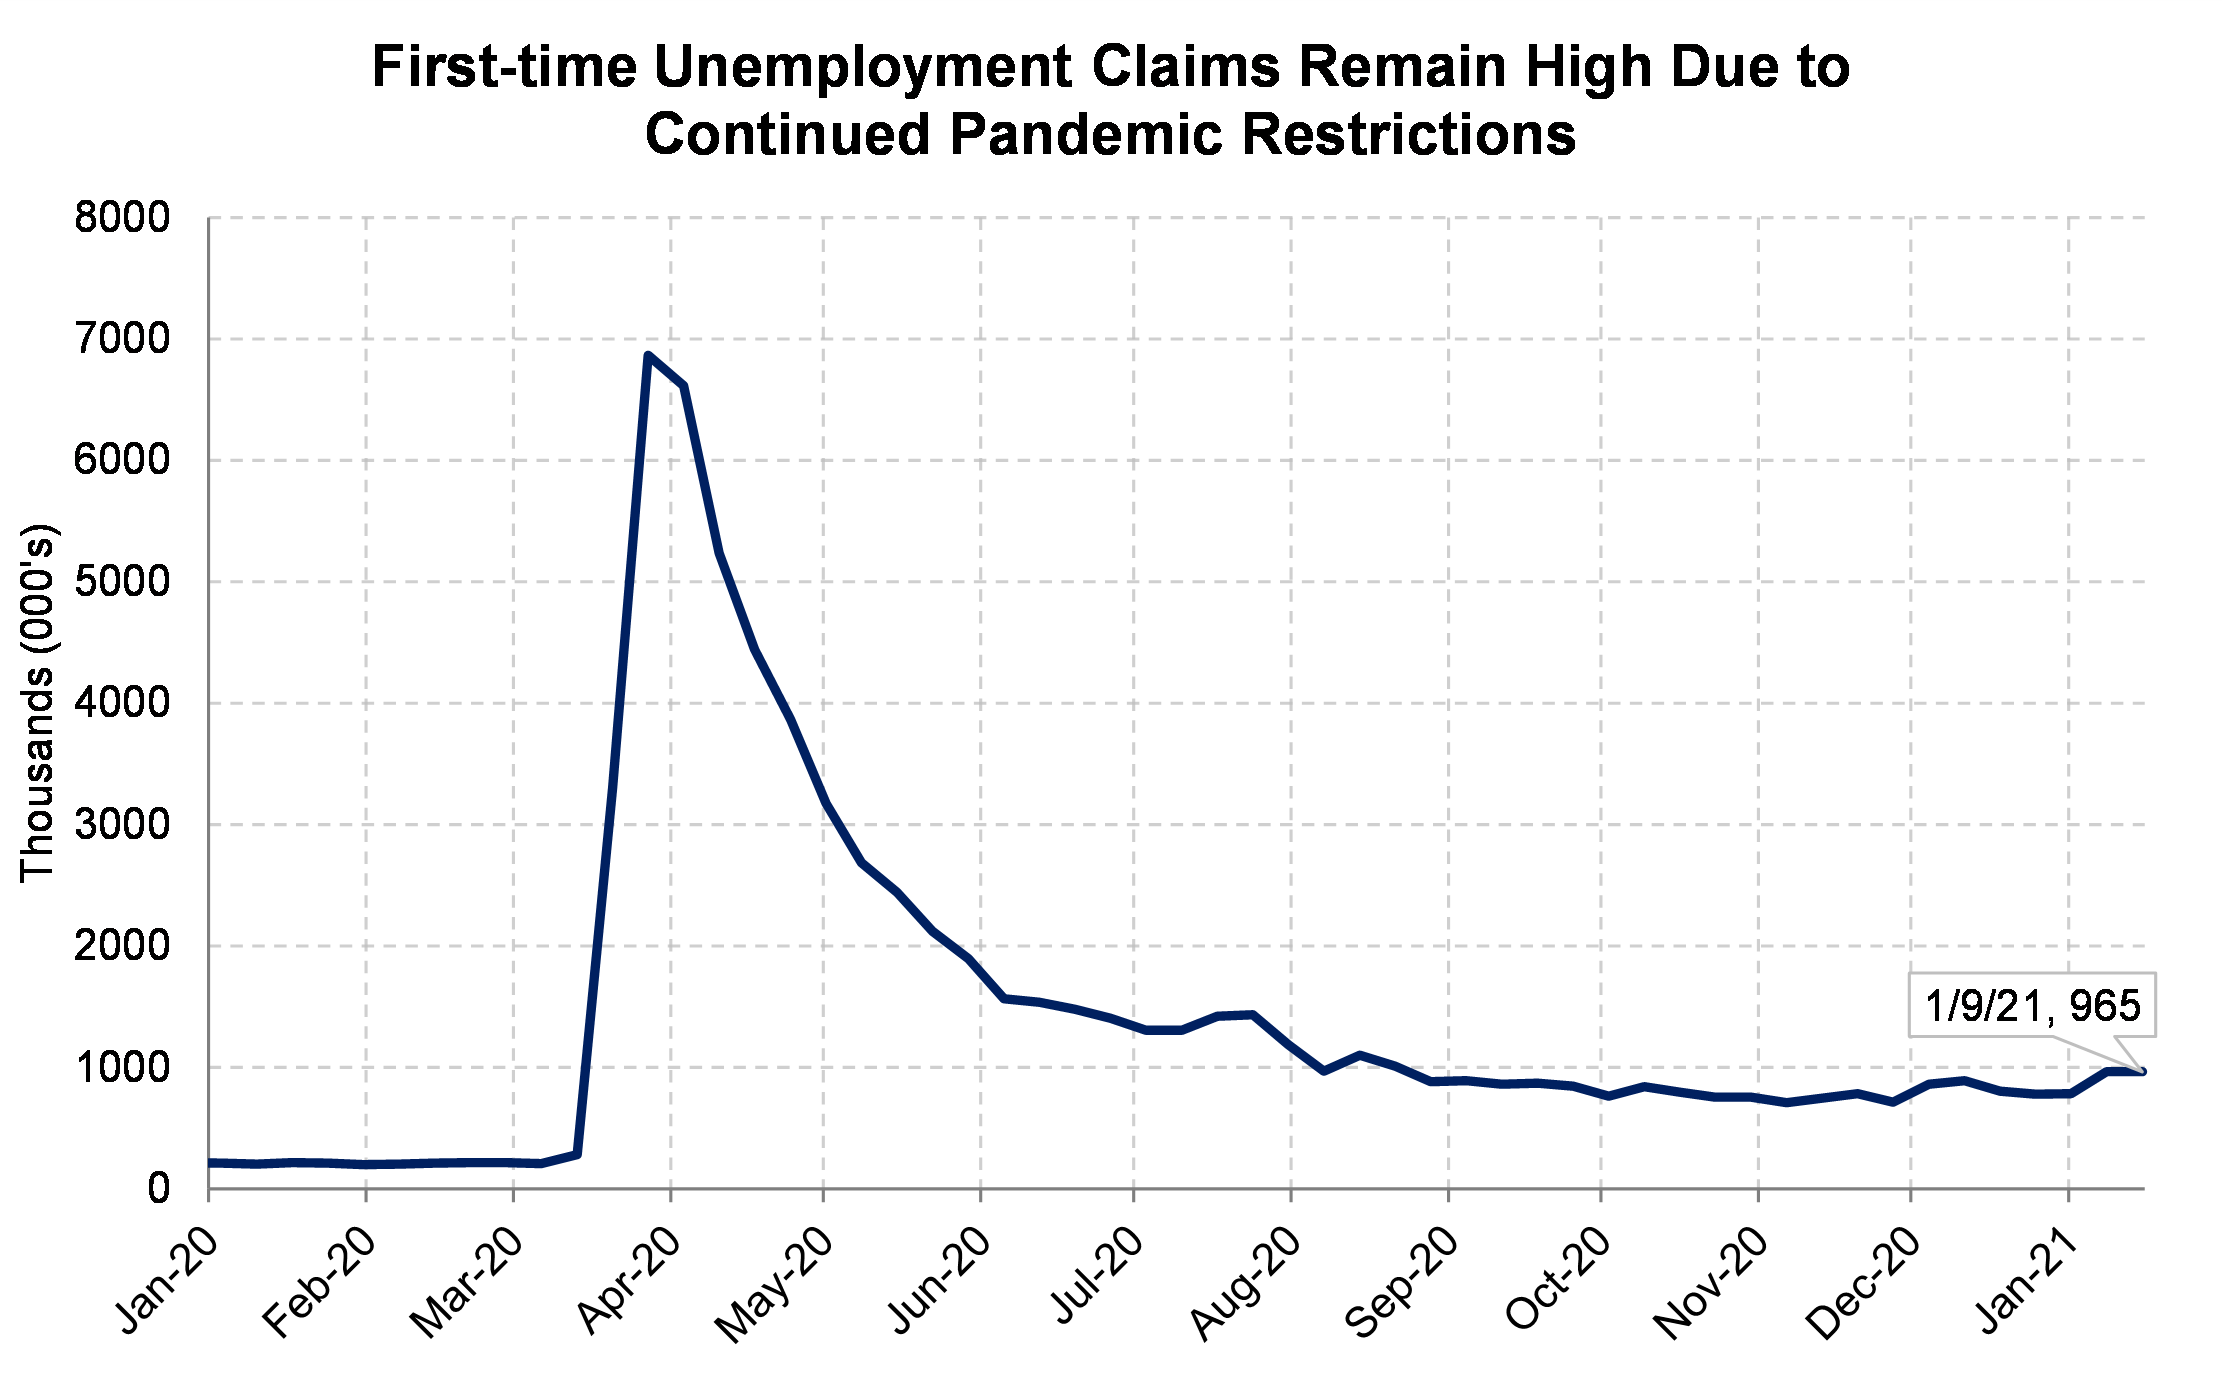 Unemployment Claims with Pandemic